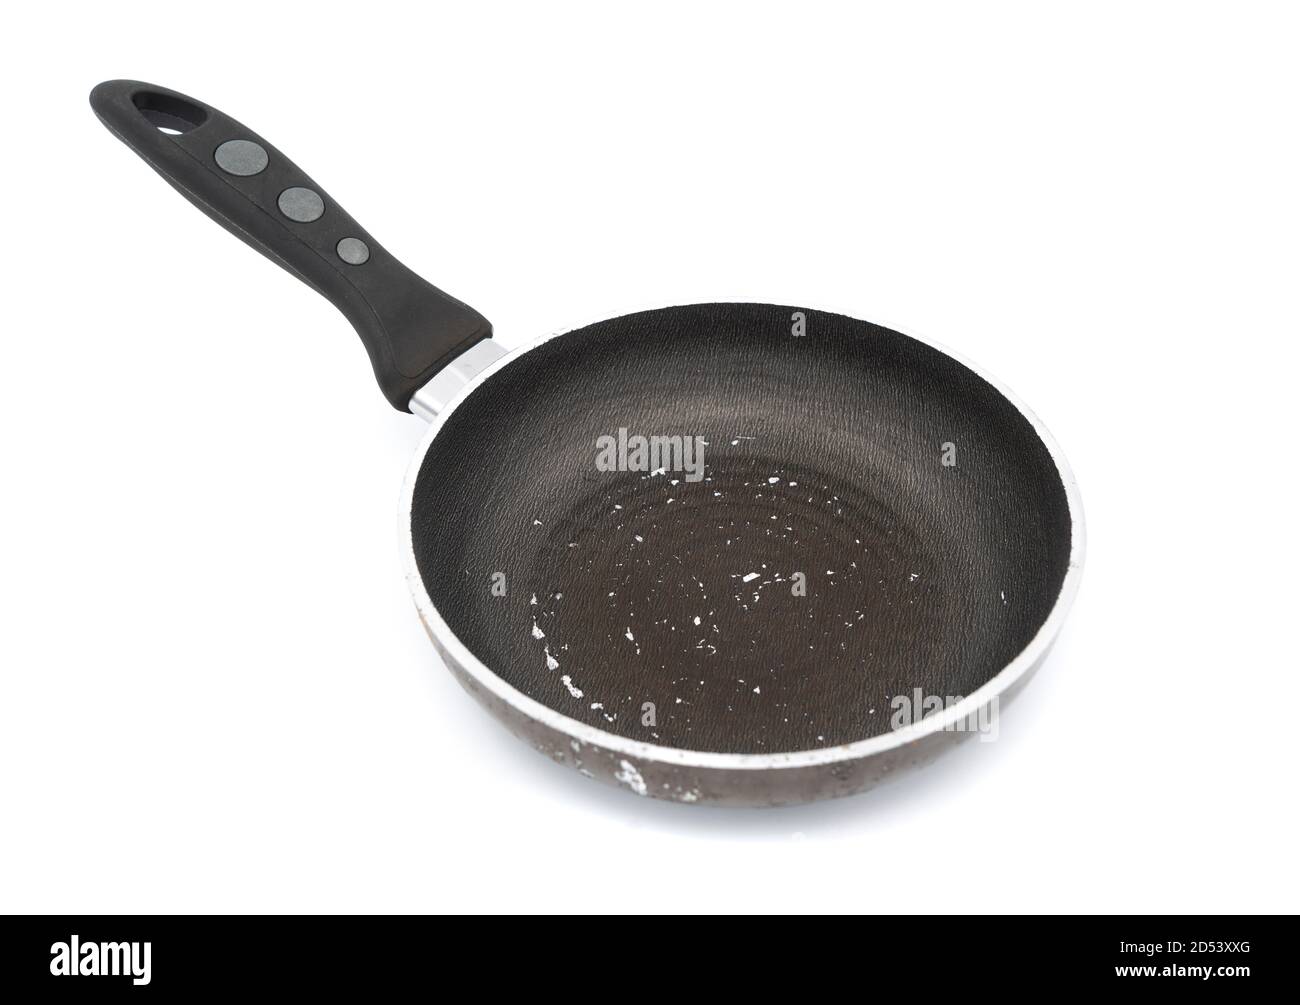 White scratches all over a non stick pan : r/pan